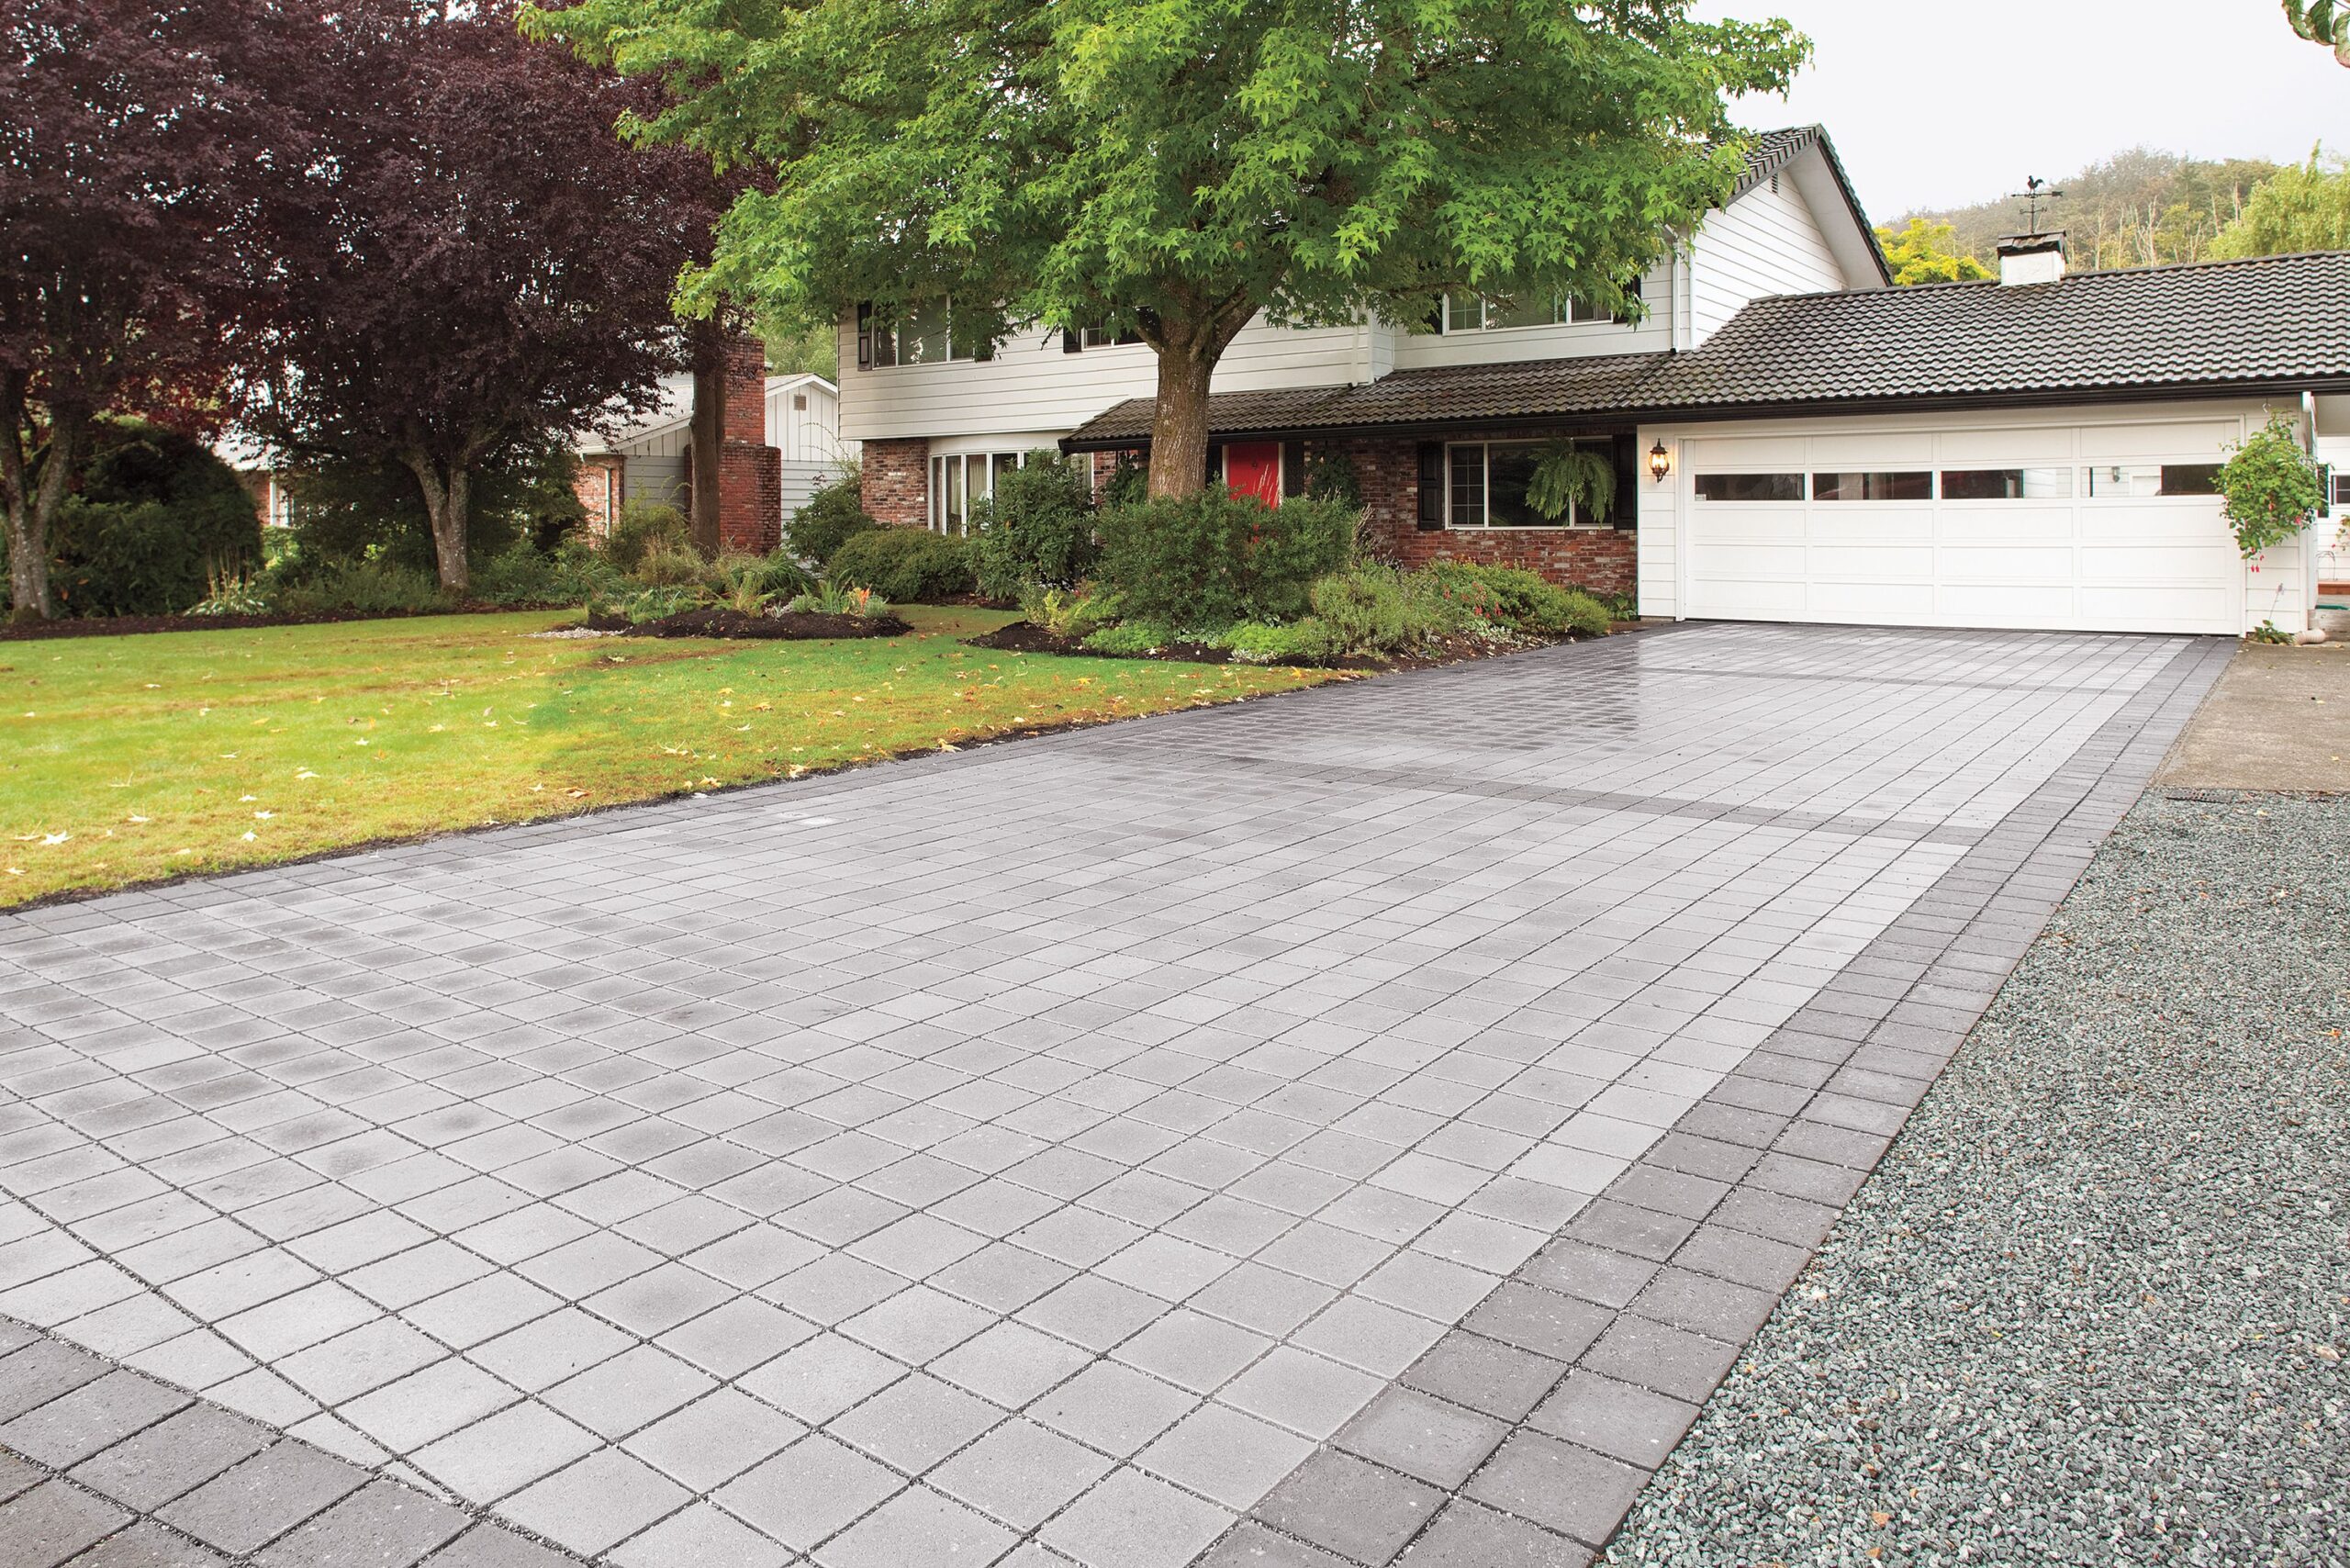 Is it essential to pressure wash your driveway regularly